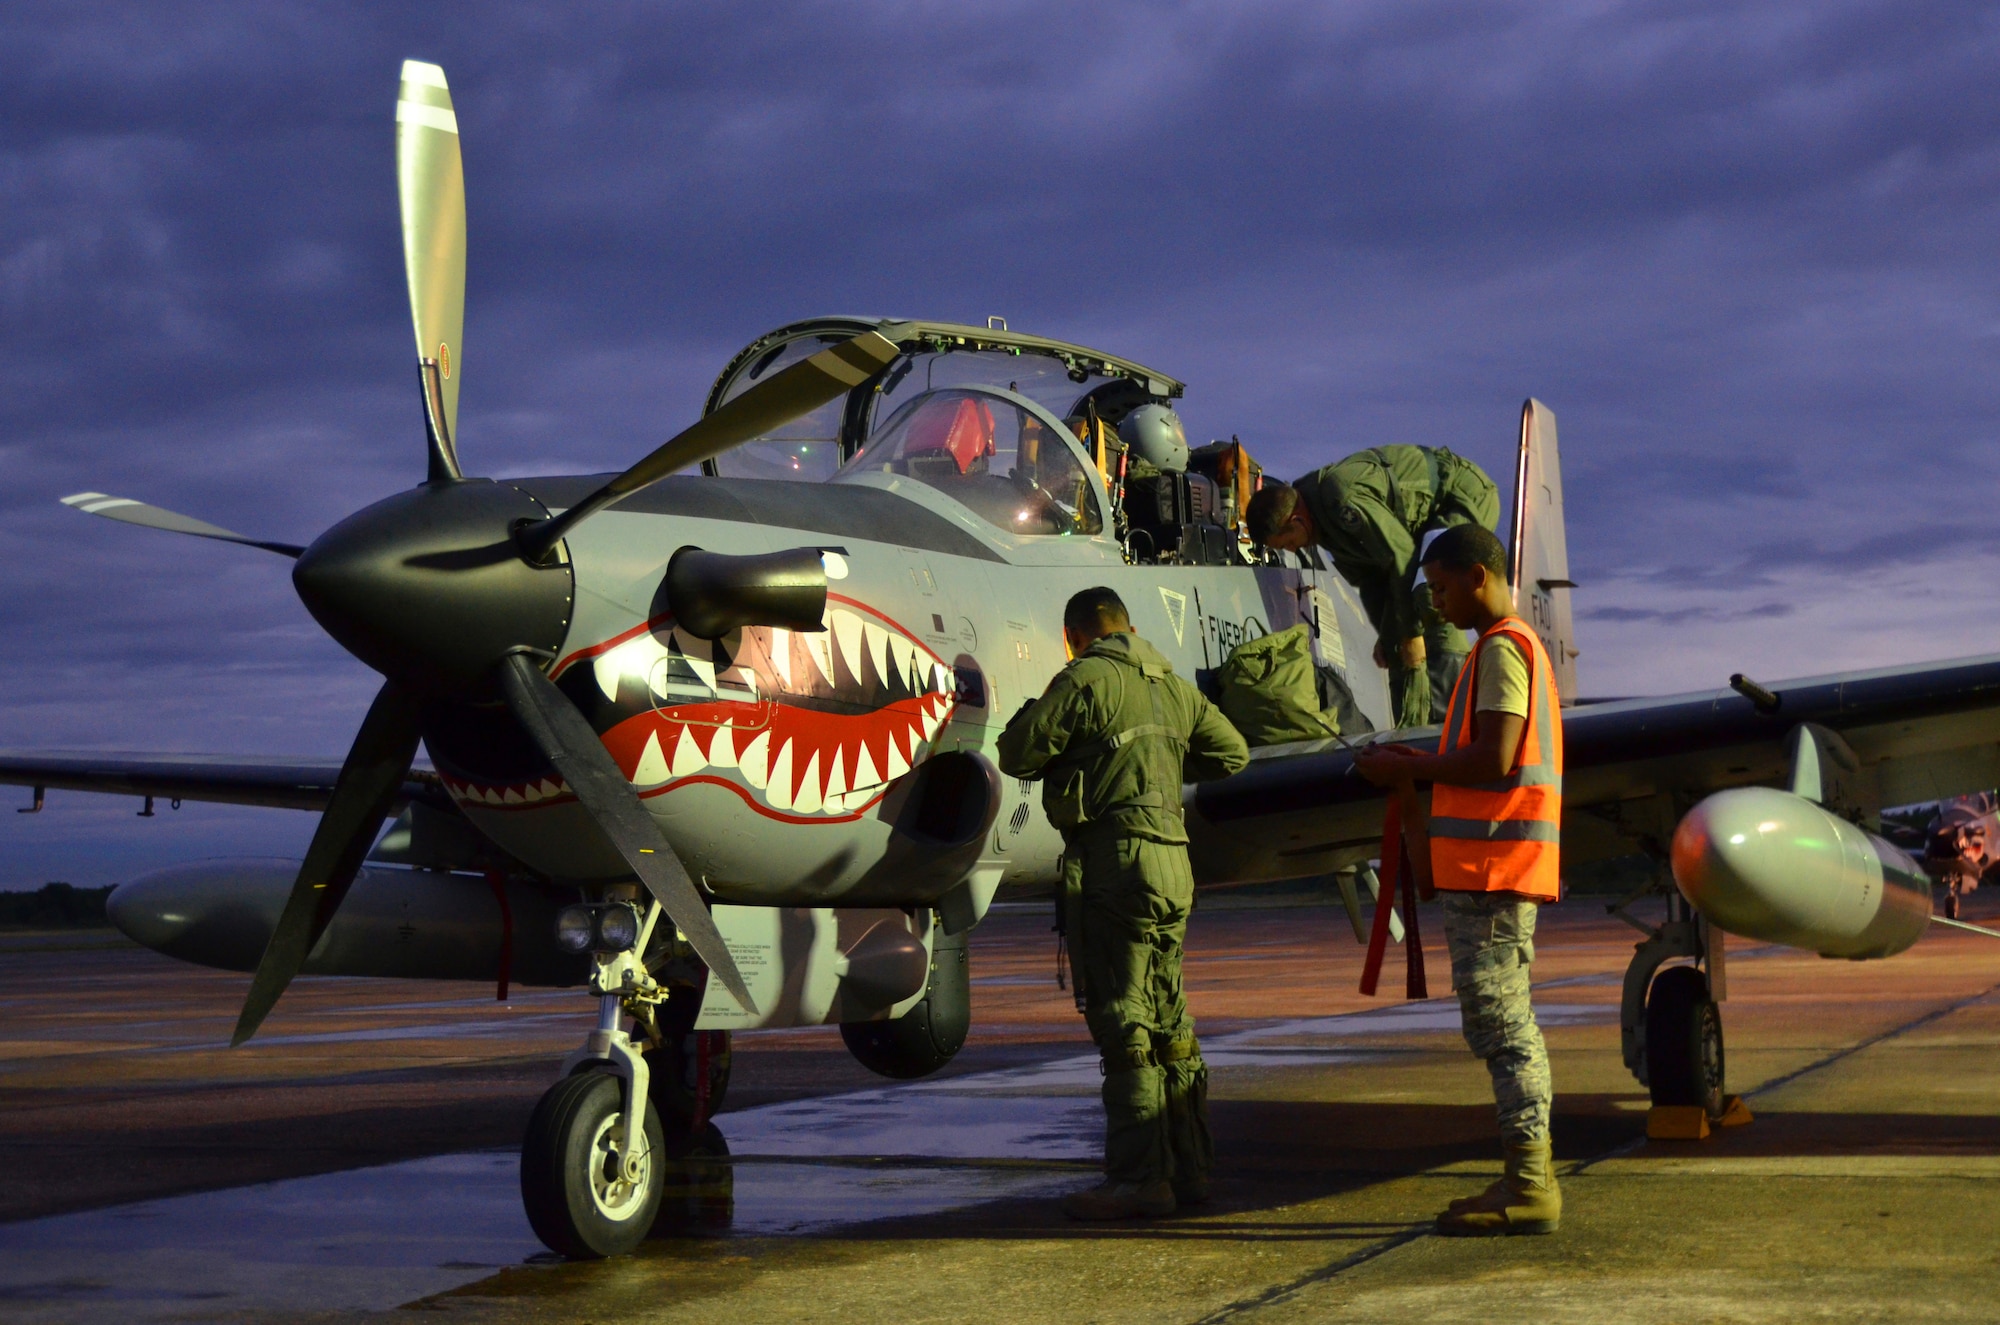 A Dominican Republic air force pilot and maintenance airman inspect an A-29 Super Tucano for a nighttime flight as part of an exercise to detect and track illegal drug traffic Dec. 4, 2013. The exercise is part of the Sovereign Skies Program, an initiative between the U.S., Colombian, and Dominican Republic air forces to share best-practices on procedures to detect, track and intercept illegal drugs moving north from South America. Since the program’s inception, the number of aircraft suspected to traffic drugs through the Dominican Republic dropped from more than 100 annually to nearly zero. (U.S. Air Force photo by Capt. Justin Brockhoff/Released)


